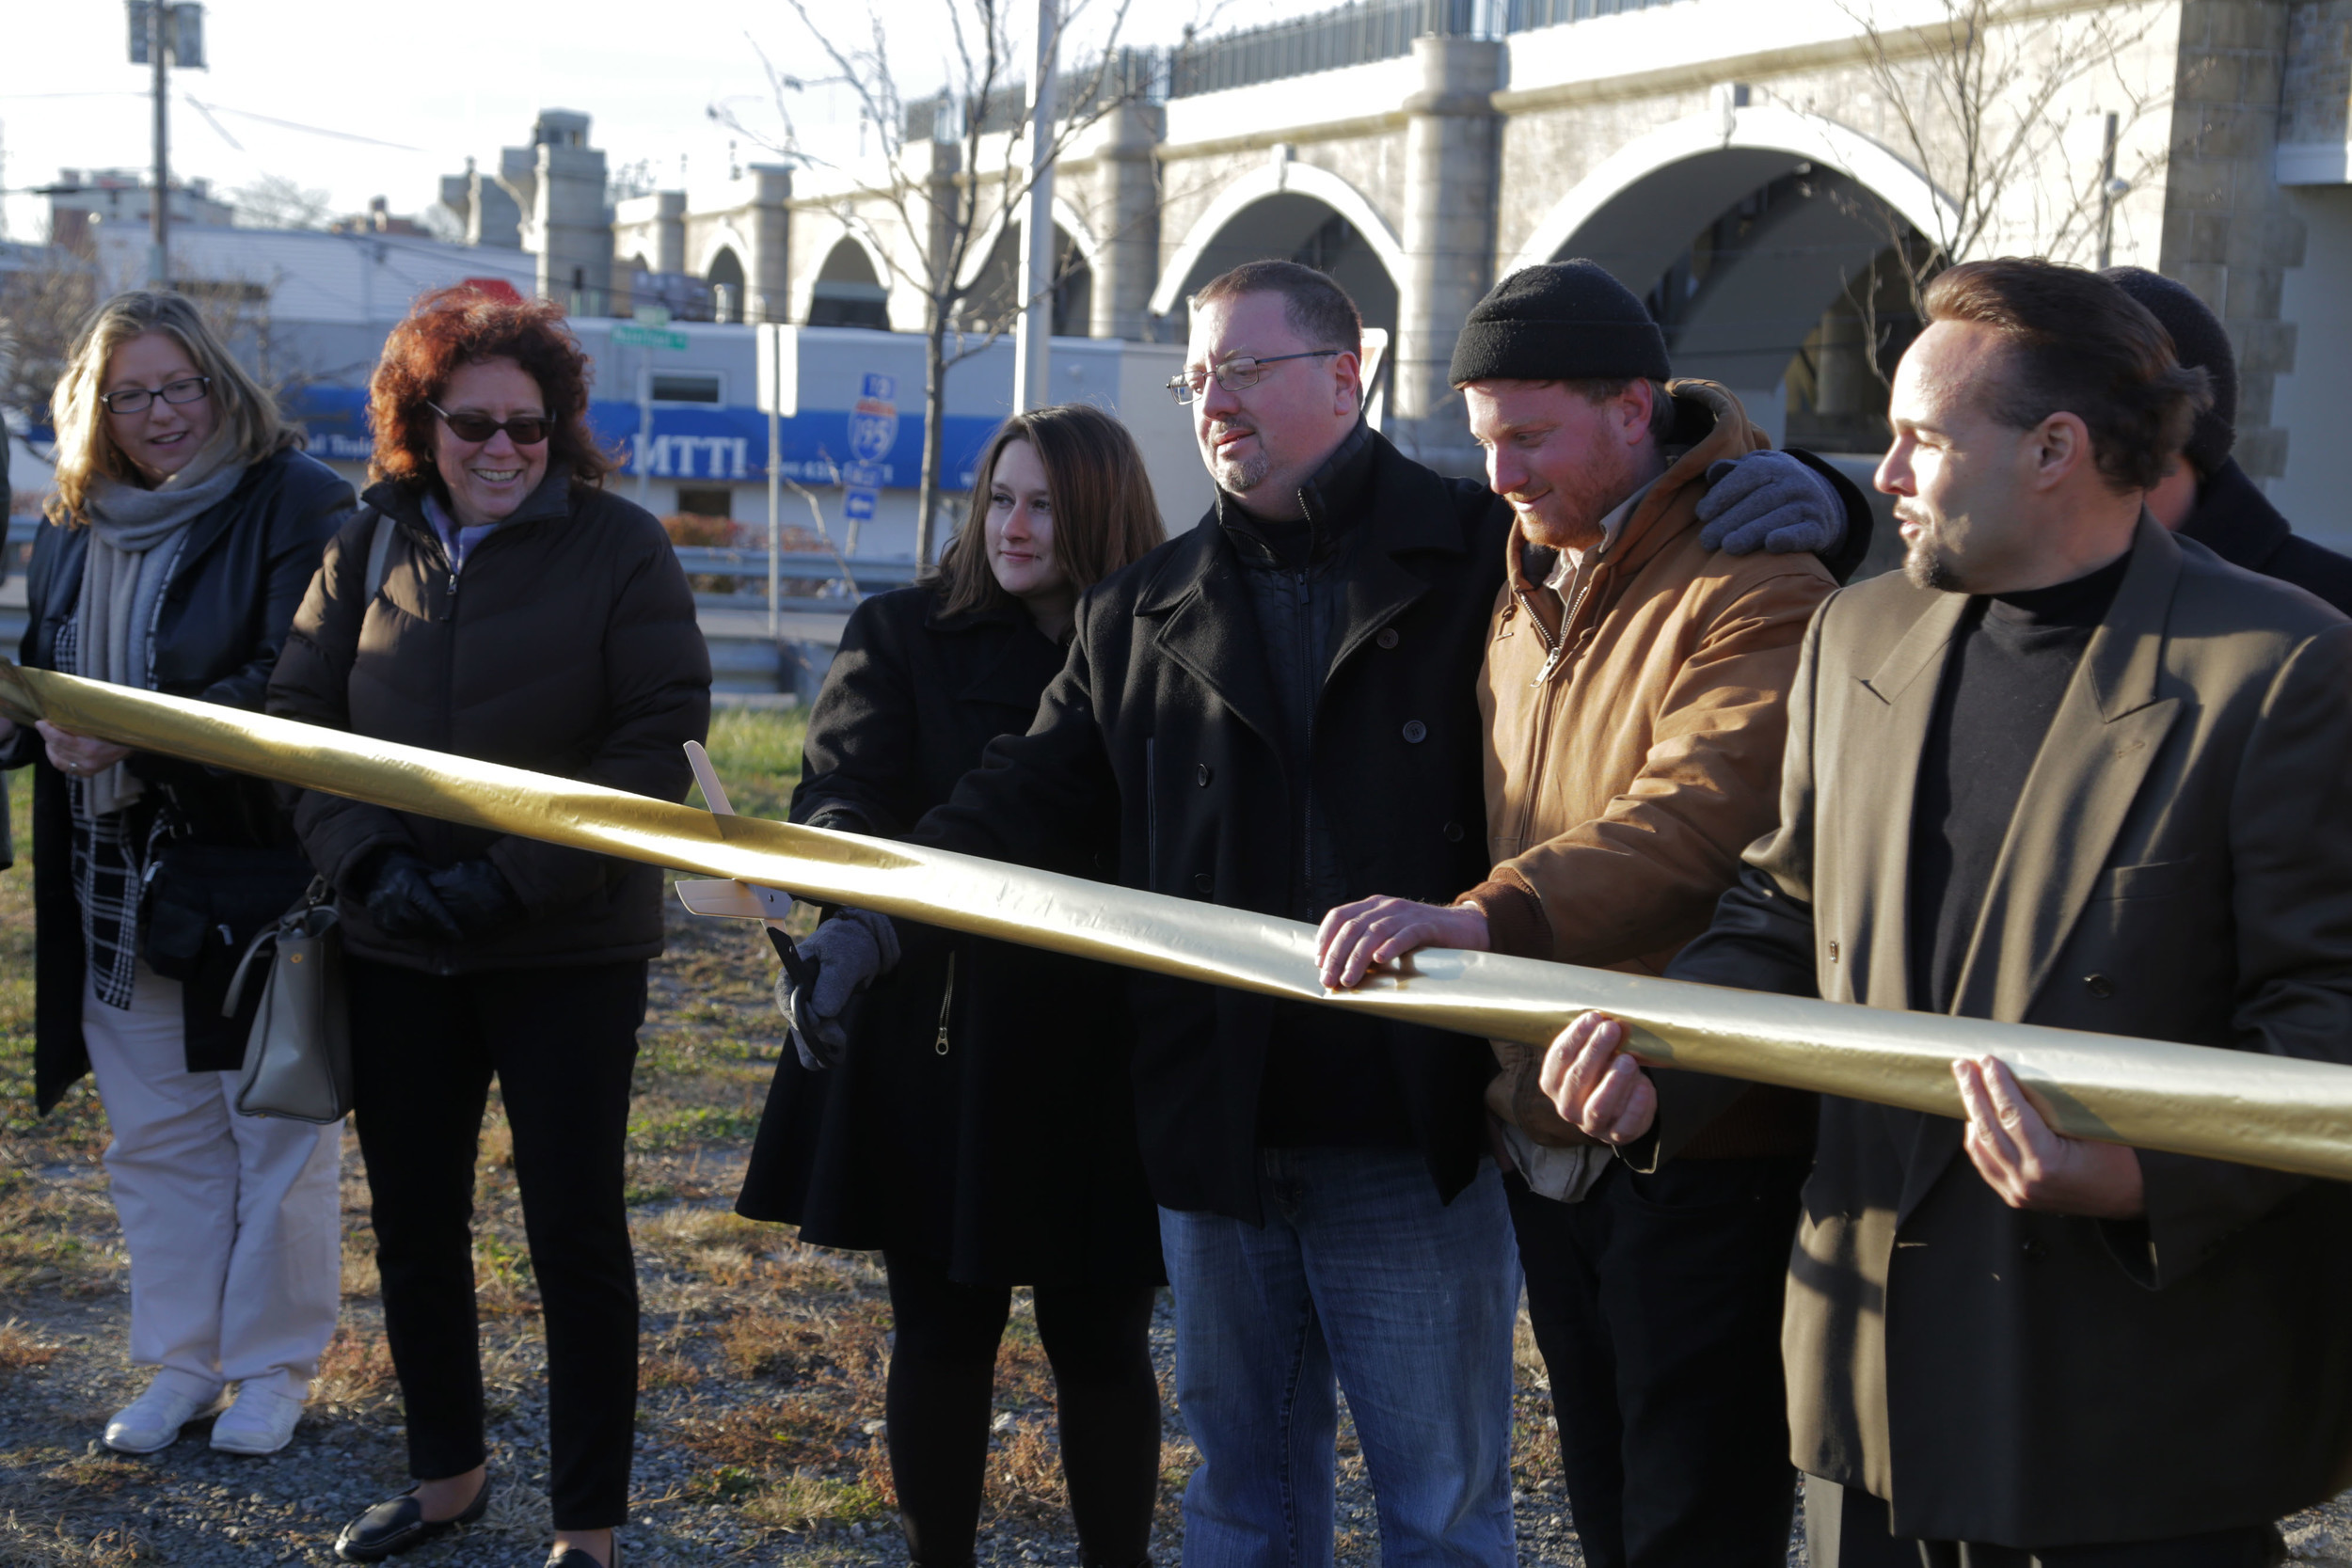 Members of the East Providence Arts Council cut a ribbon in front of the new sculpture "Rigging" located in the new Watchemocket Square.